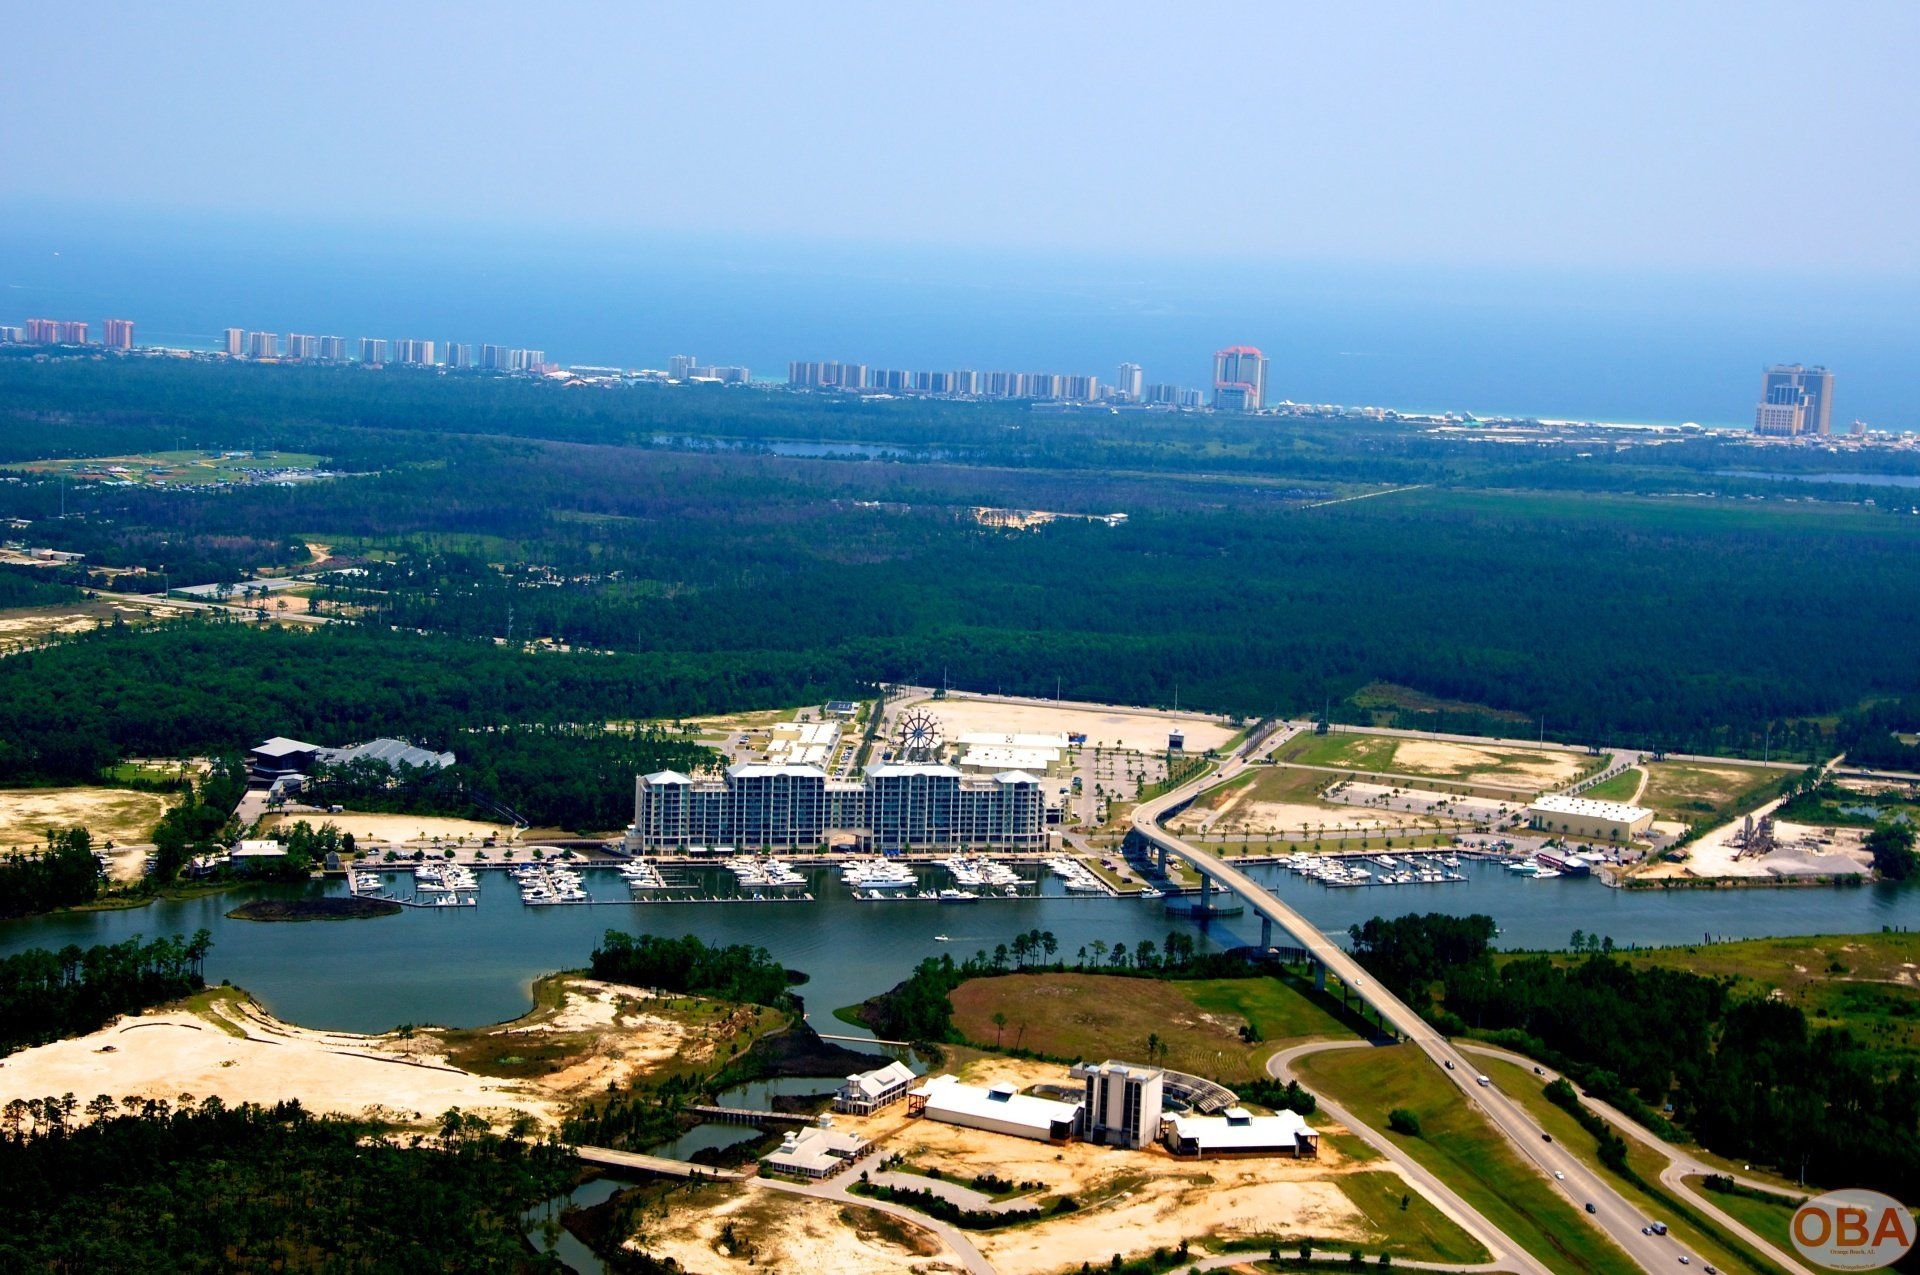 The Wharf in Orange Beach, Alabama, has bought 86 acres near the  old Bama Bayou project across the water.